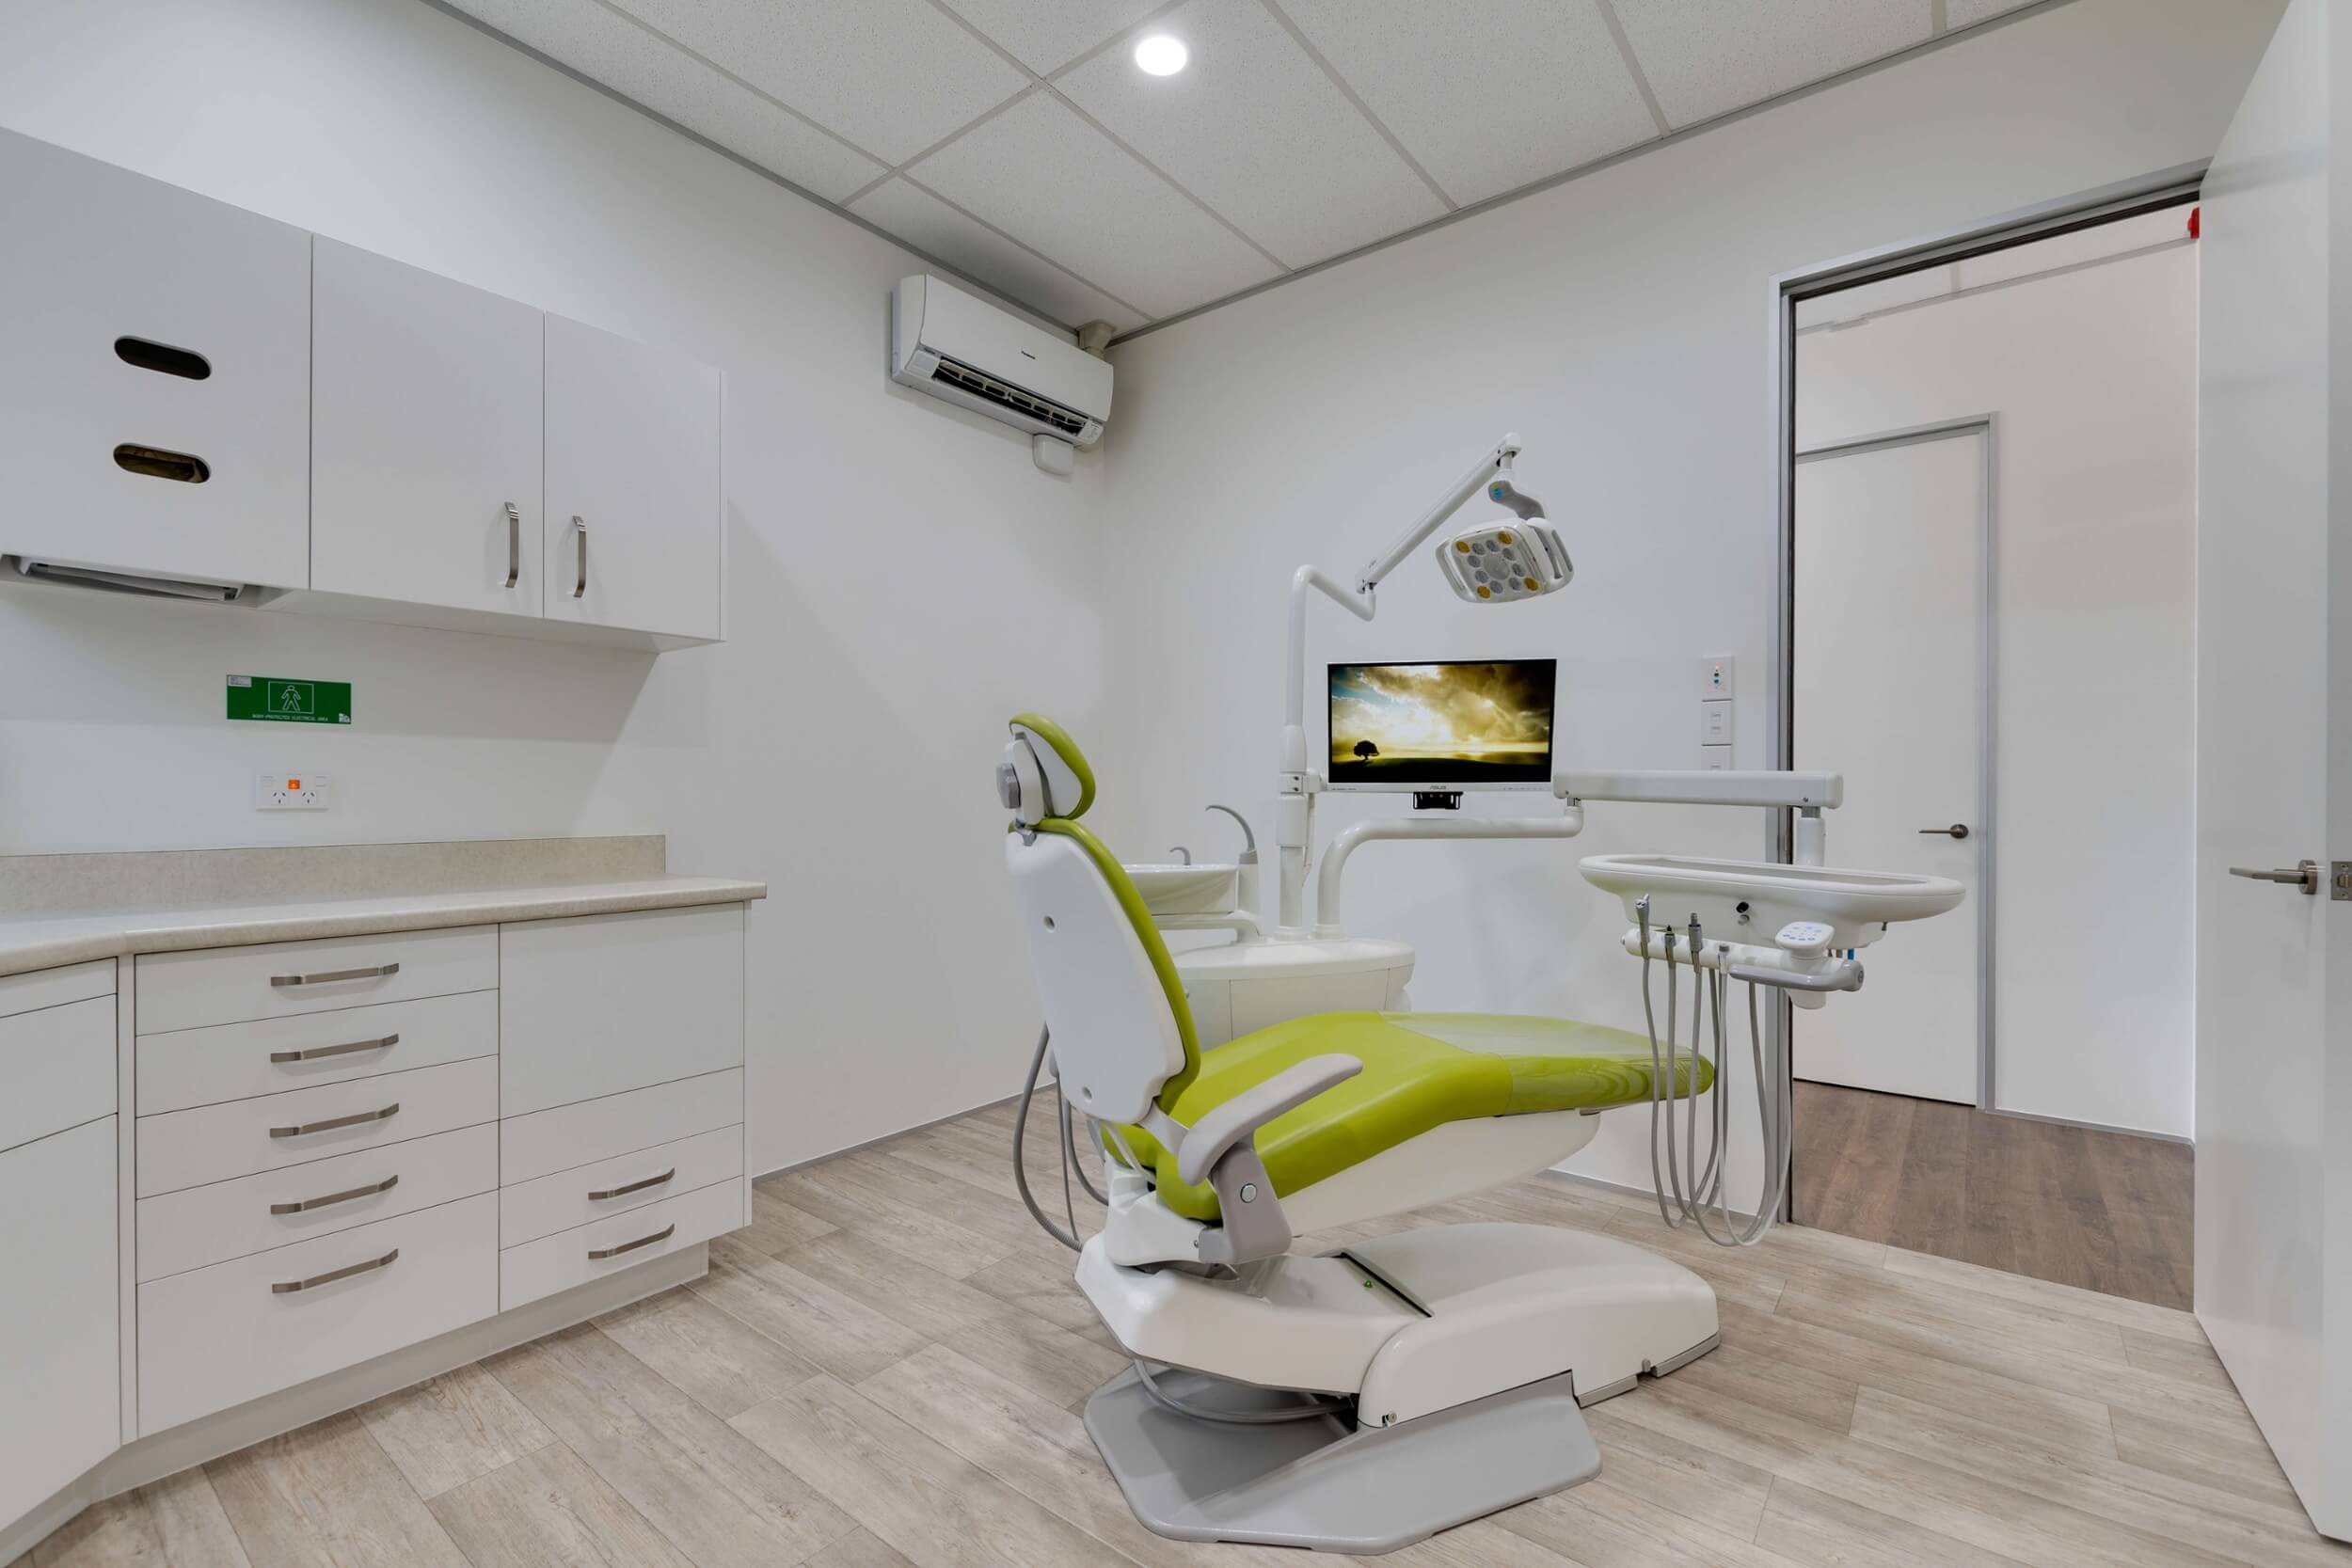 dental fit out